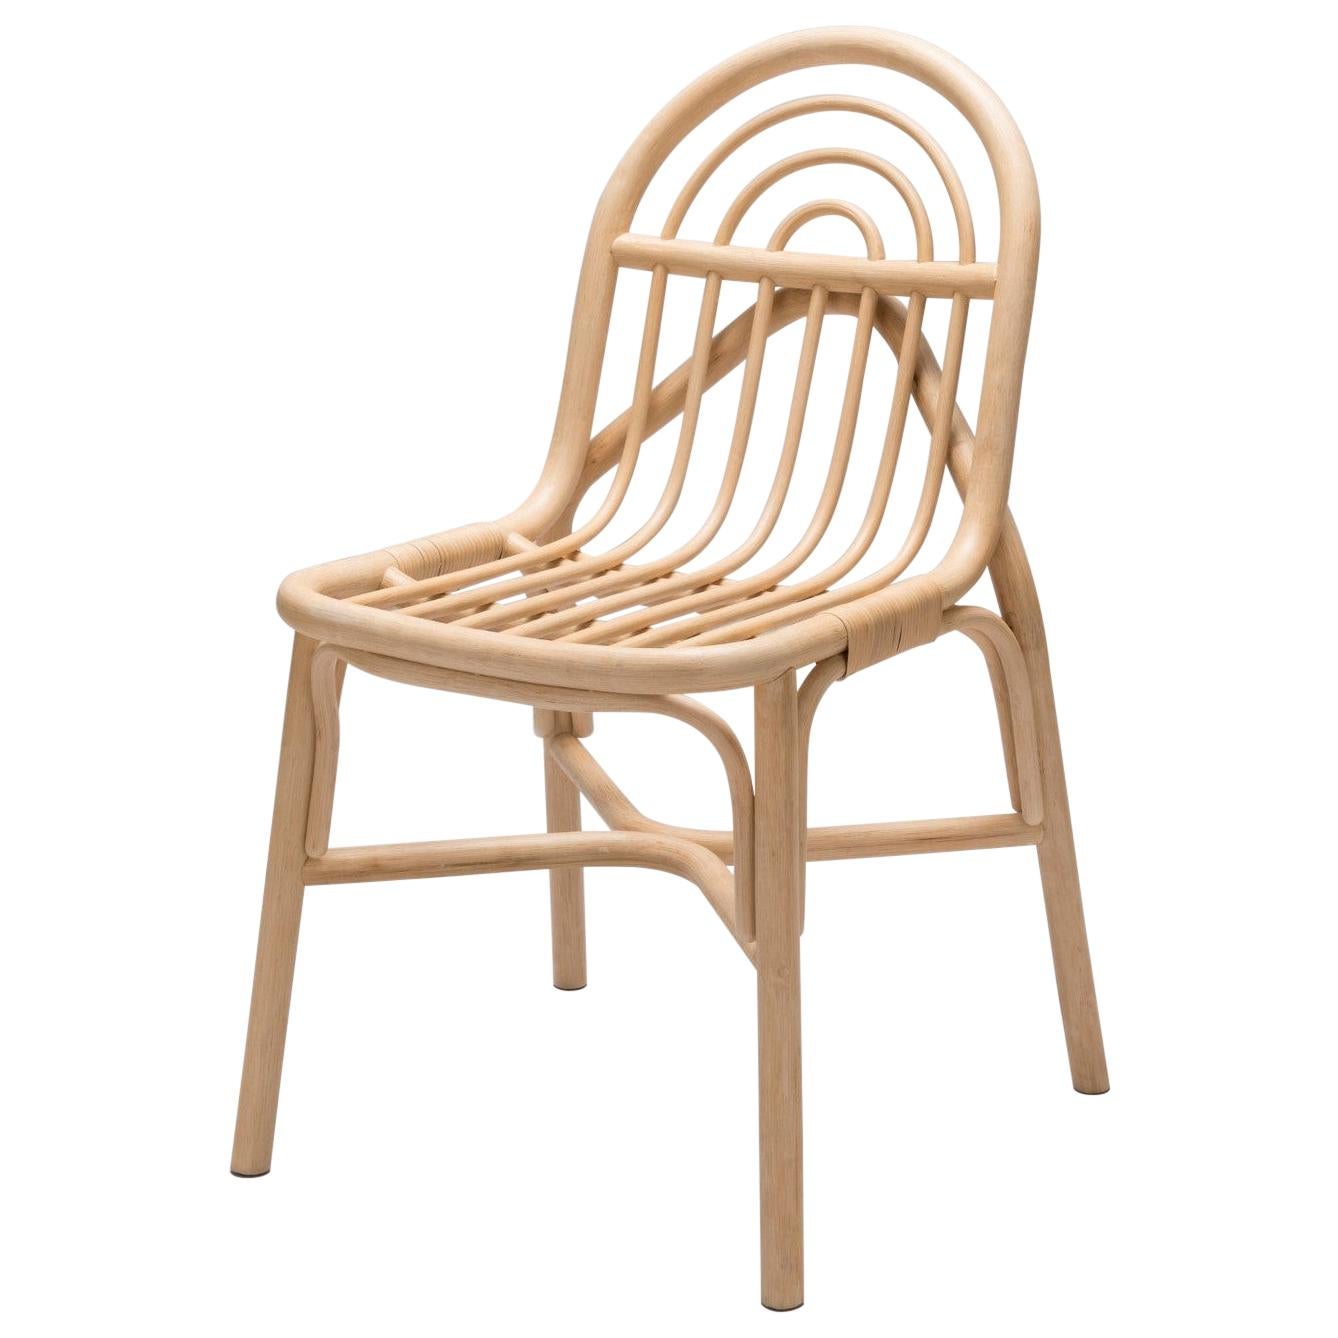 French Design Handmade and MCM Style Curved Rattan Chair